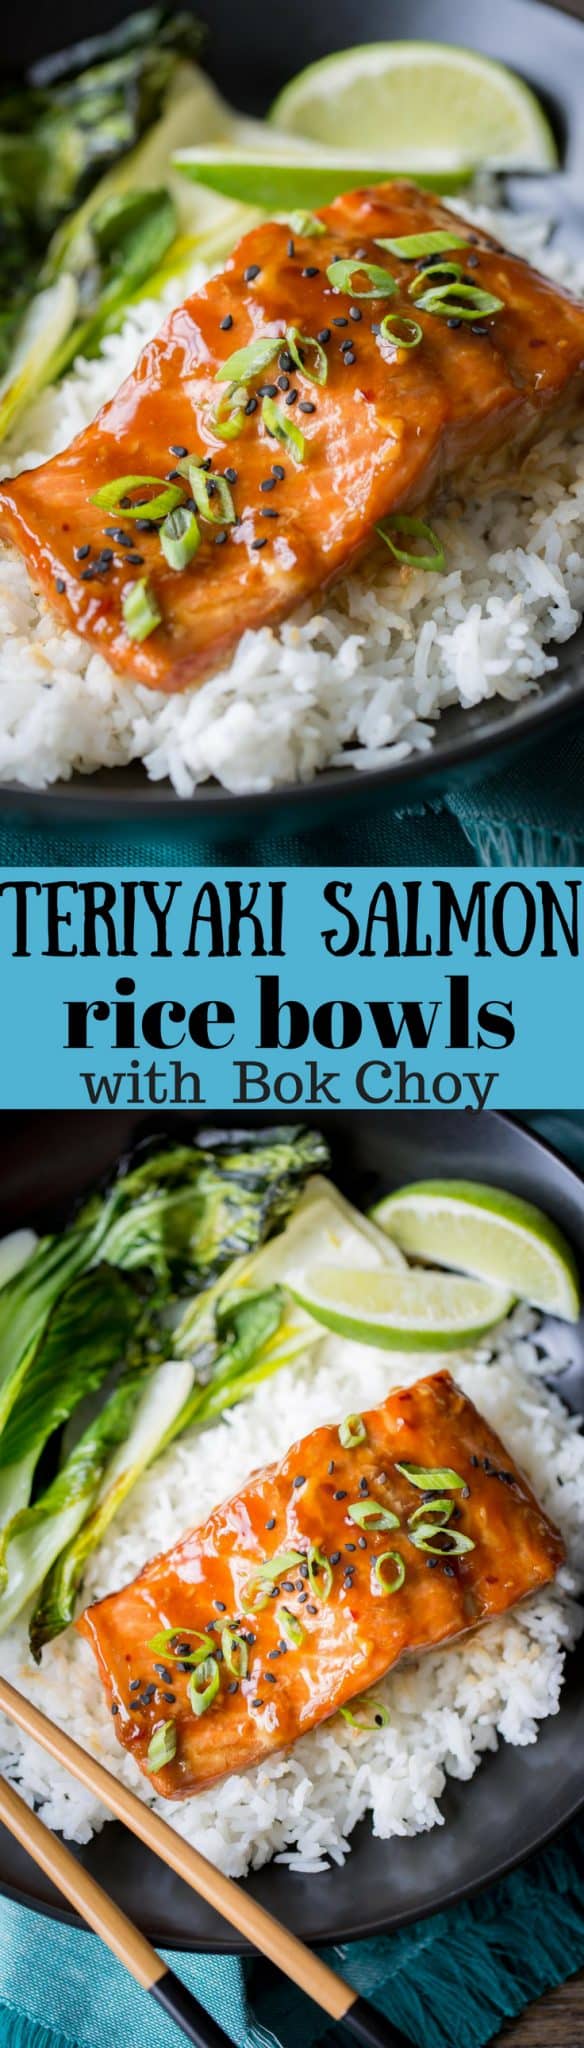 Teriyaki Salmon Rice Bowls with roasted Bok Choy ~ a super easy, quick and delicious dinner with terrific (almost intense) flavor from the simple homemade teriyaki sauce. Once you try this recipe, I bet you never buy pre-made teriyaki sauce again! www.savingdessert.com